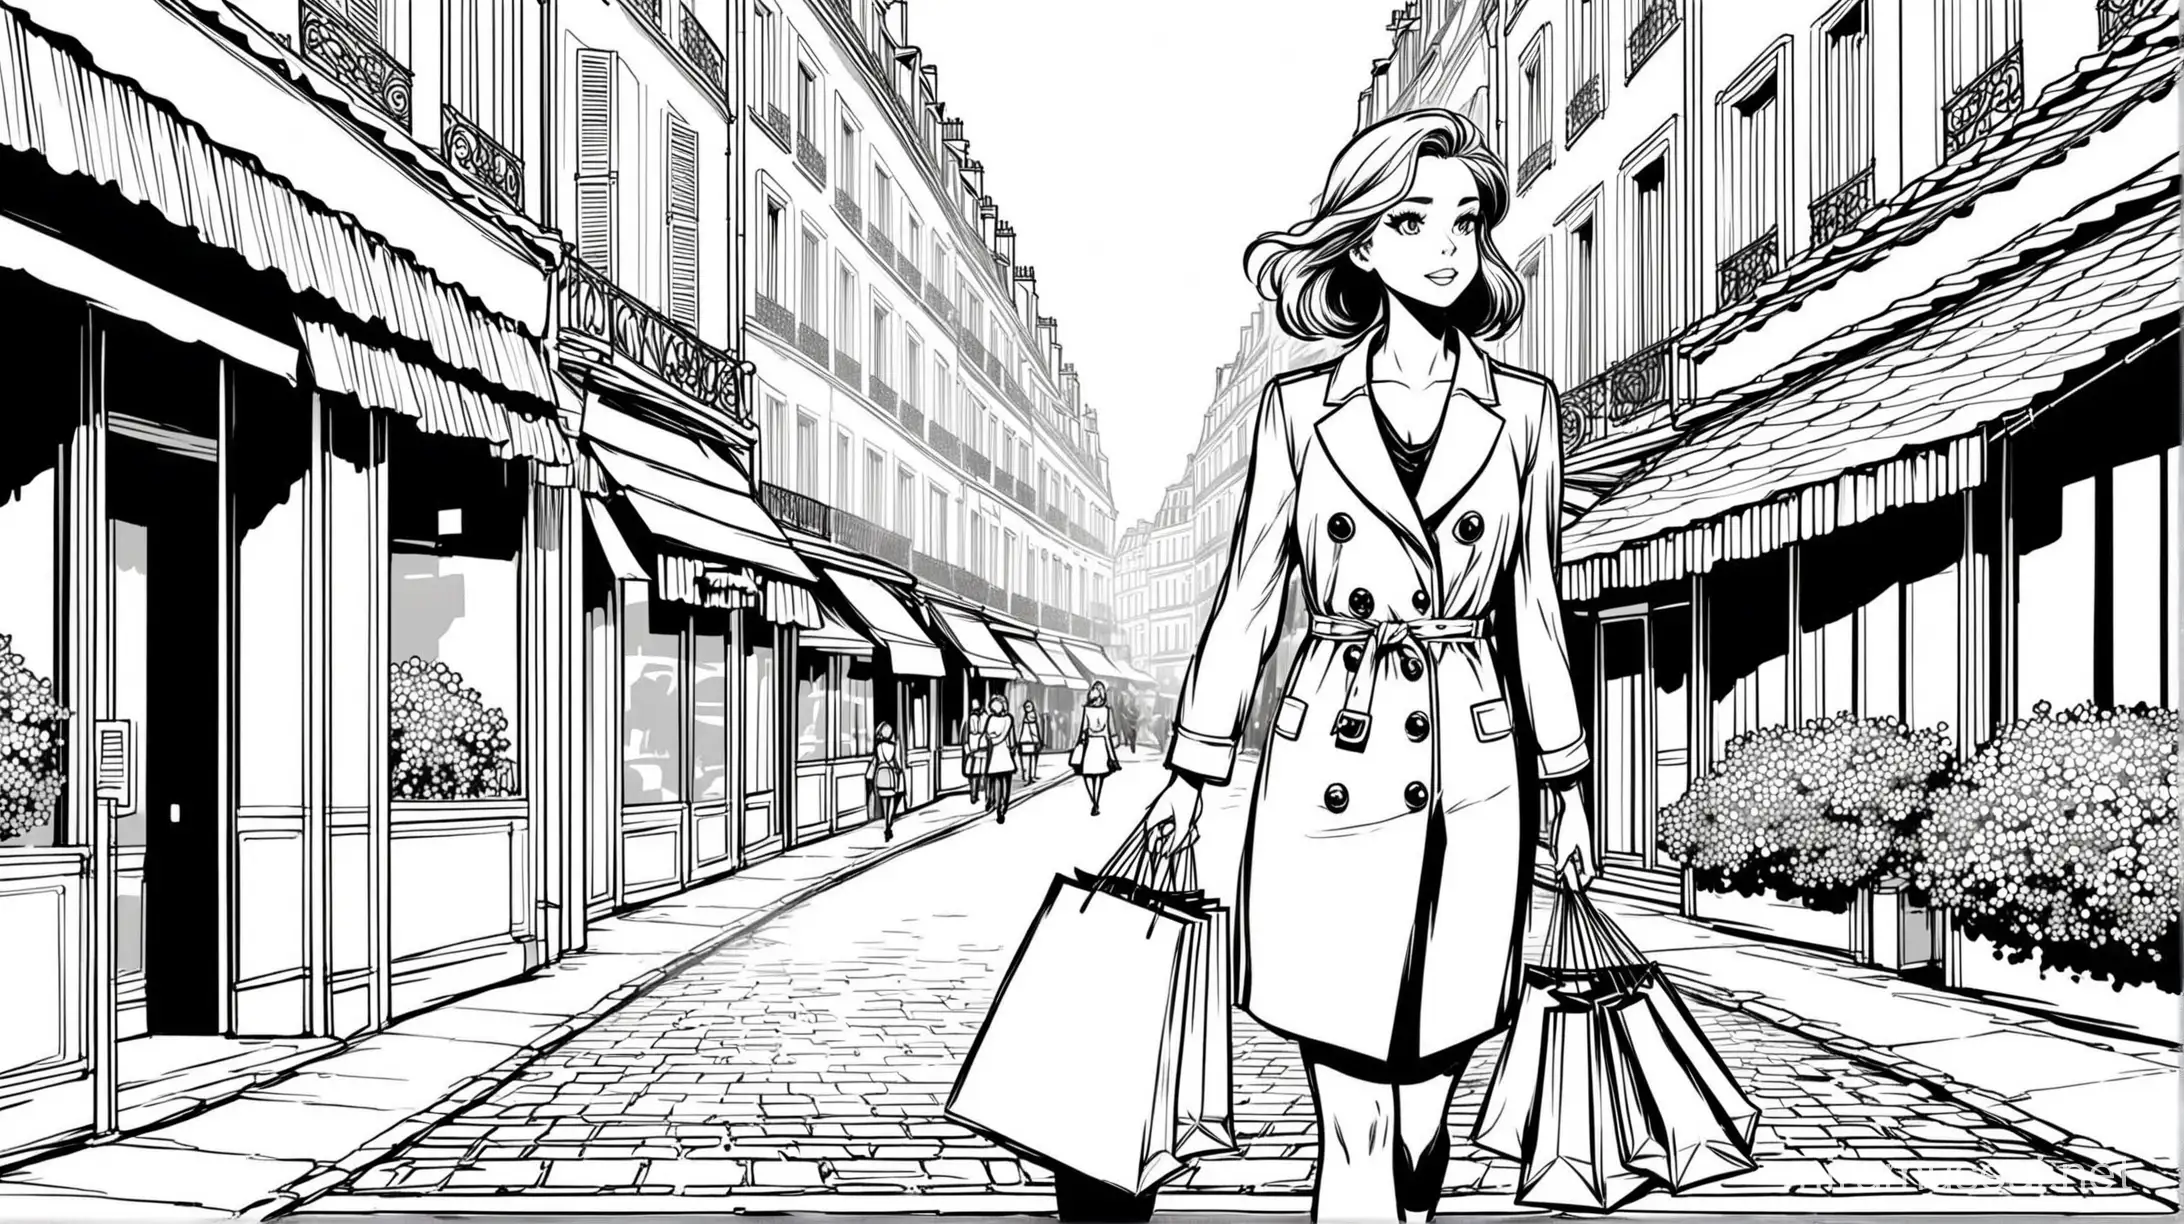 Stylish Woman with Shopping Bags Strolling Parisian Street